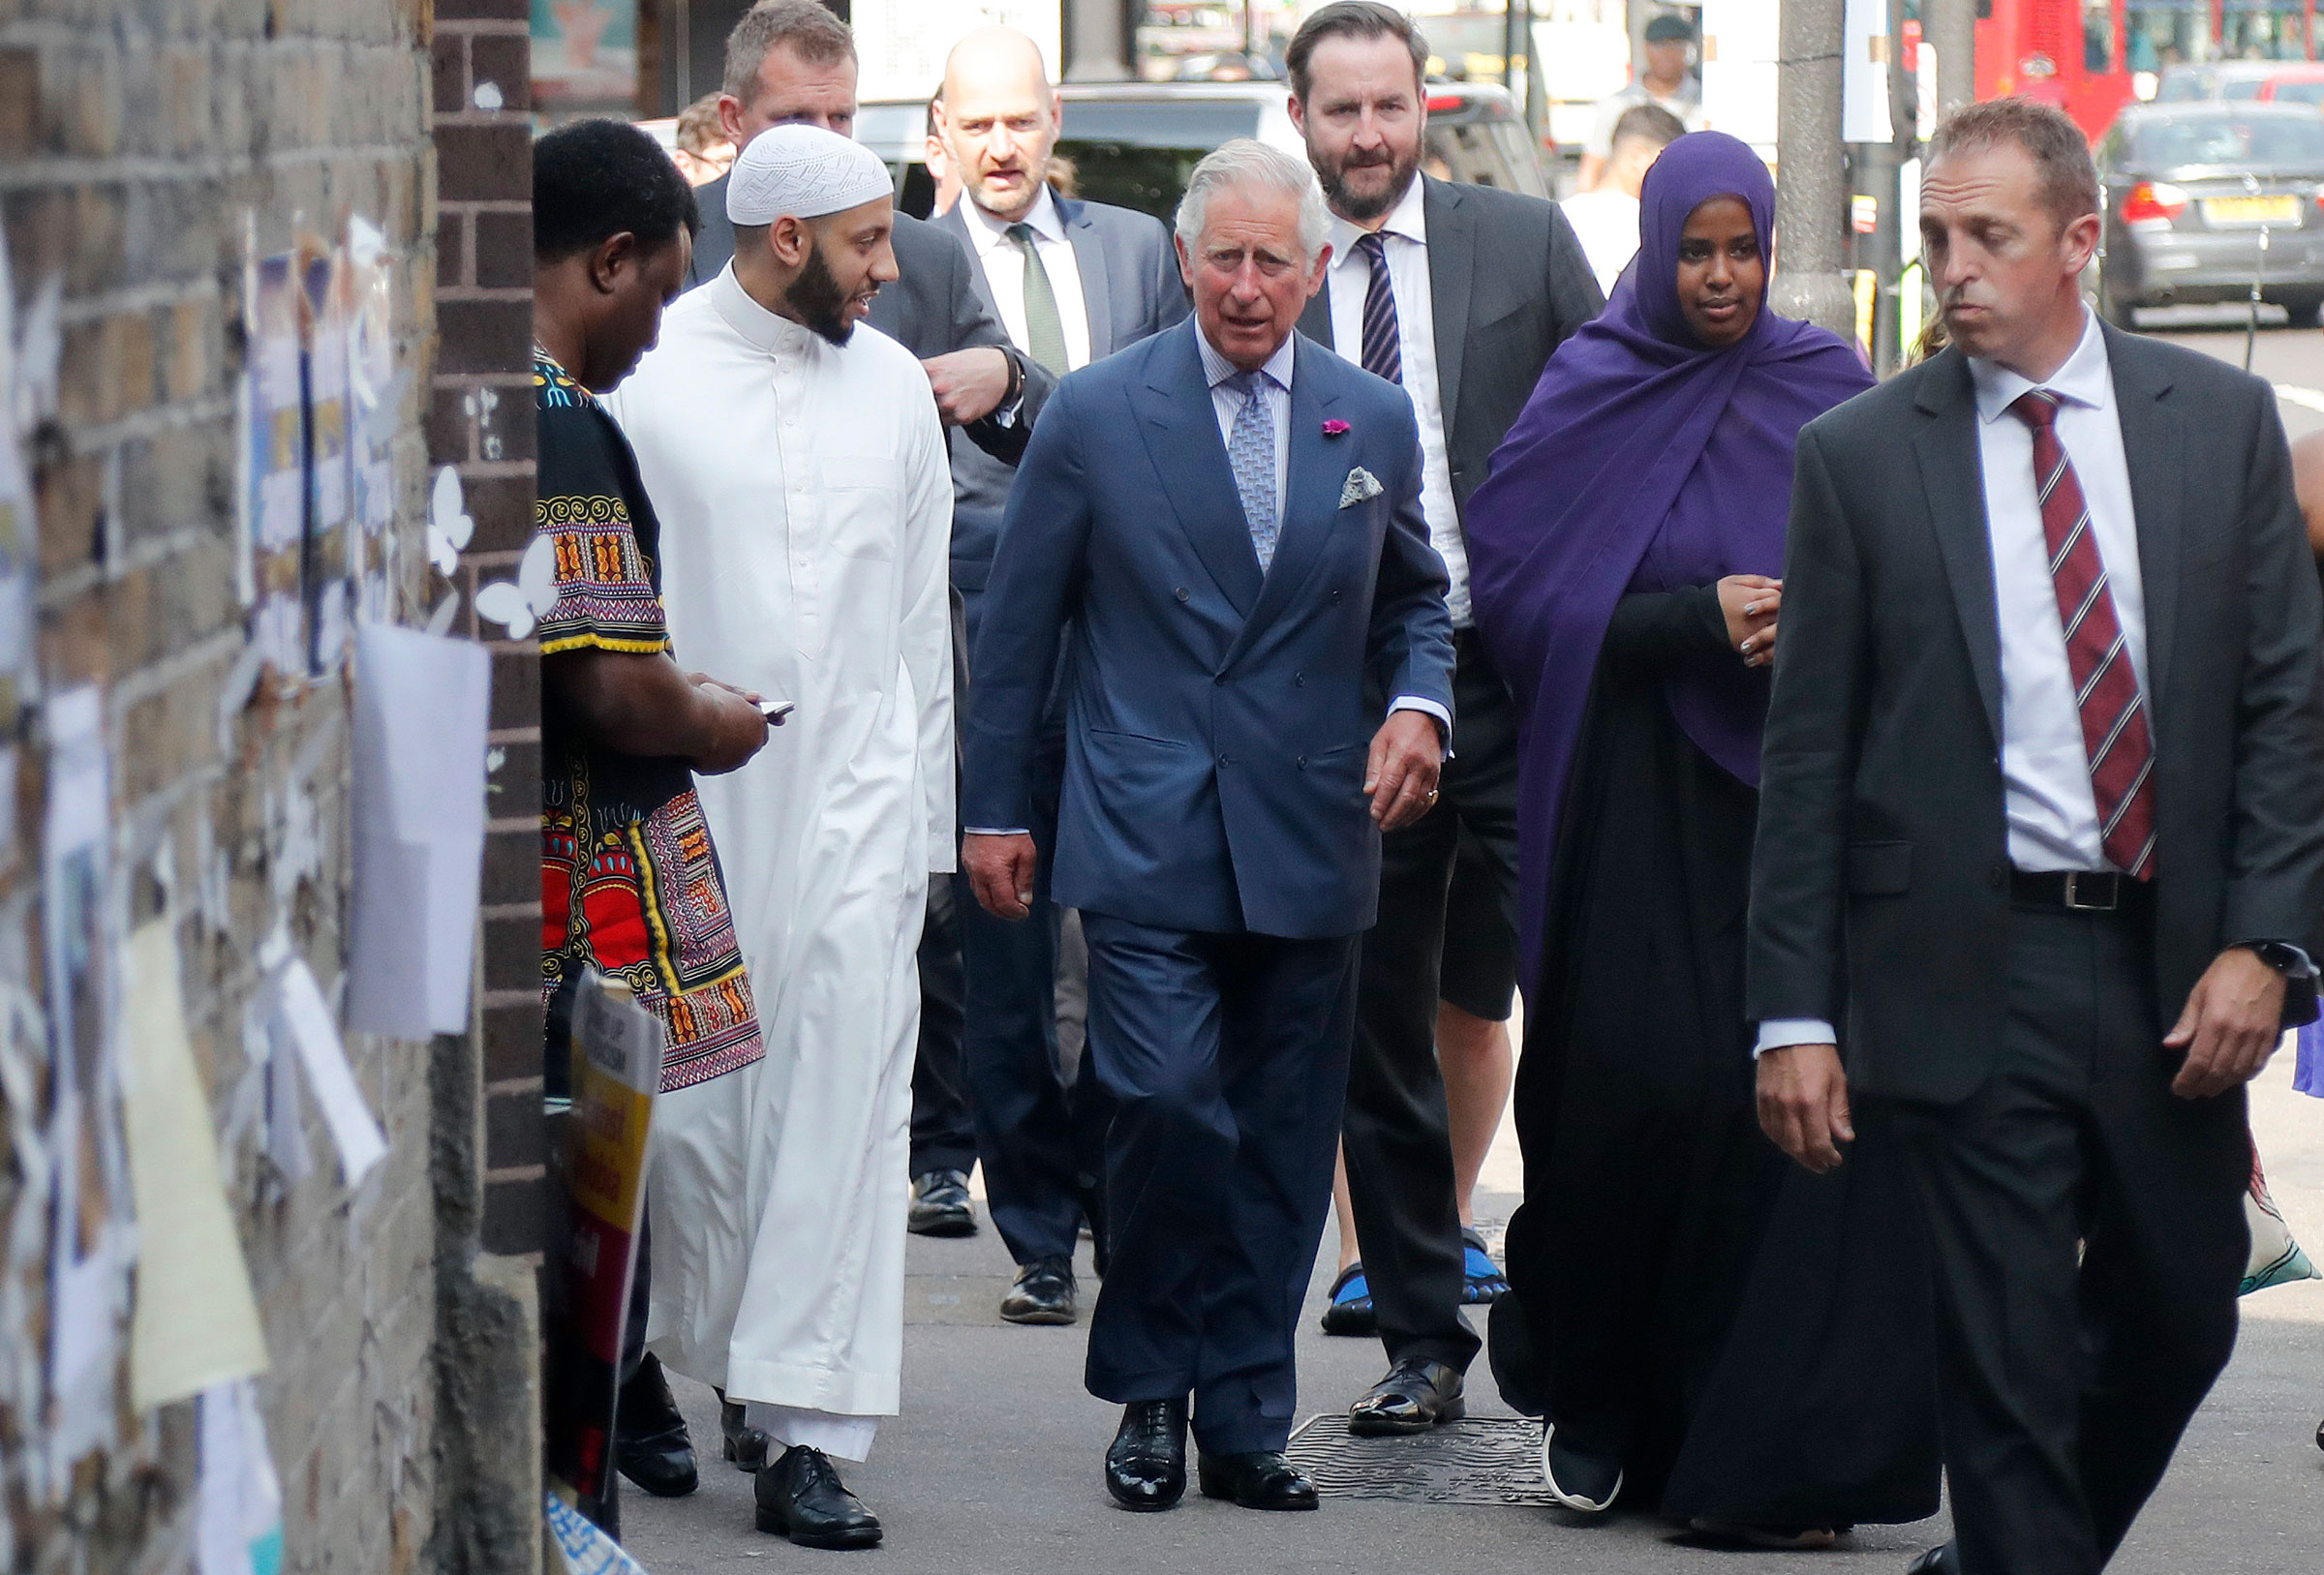 King Charles III, centre, talks to Muslim leader Mohammed Mahmoud during his visit to Muslim Welfare House, Finsbury Park, to meet members of the local community and hear about the community's response following the recent extremist attacks in London, June 21, 2017. (Frank Augstein—AP)